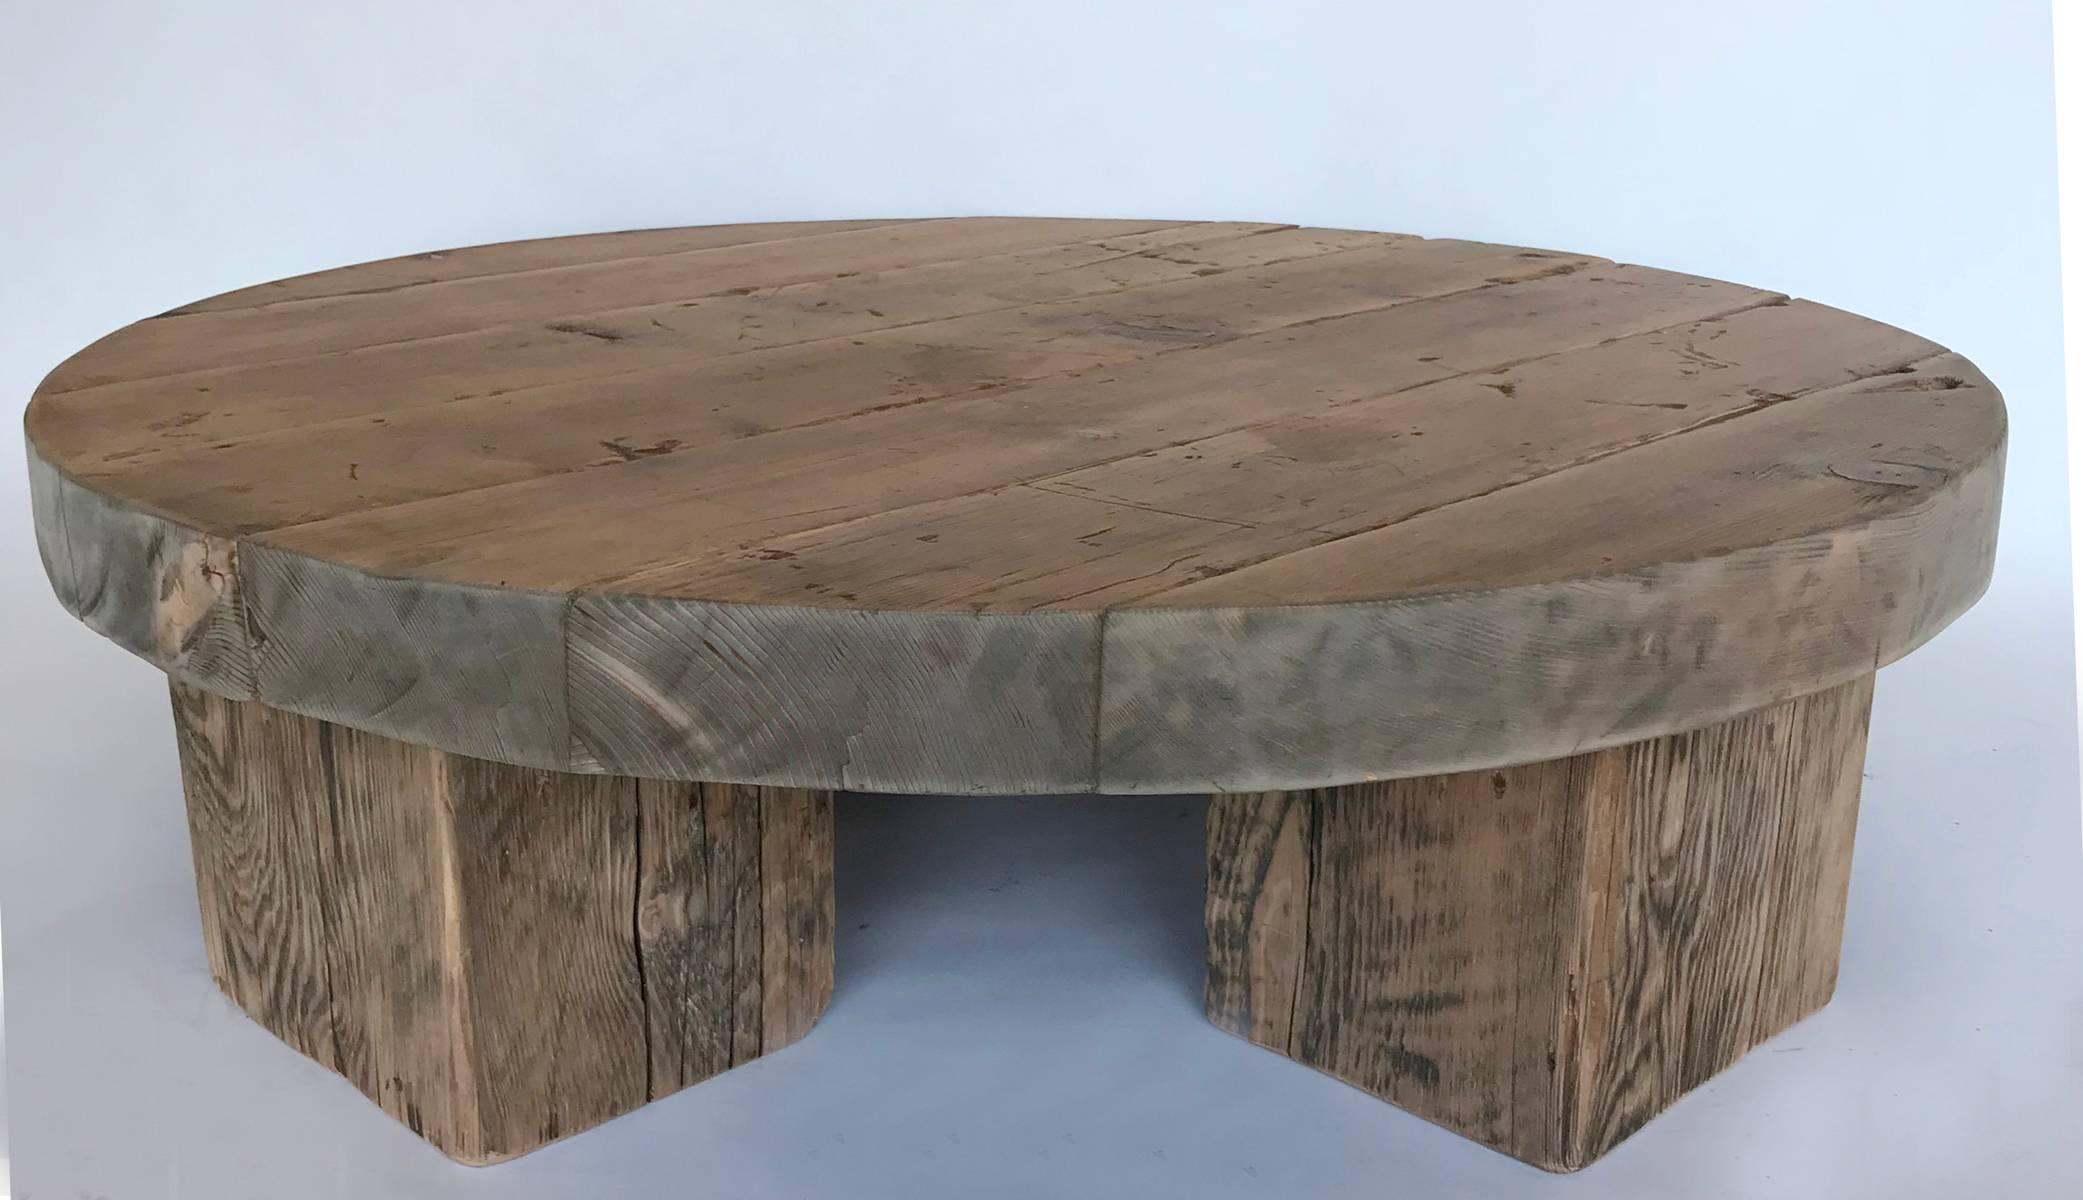 Three and a half inch thick 100 year old reclaimed wood boards make up this low rustic modern coffee table with four solid thick legs. Natural finish. Smooth to the touch.